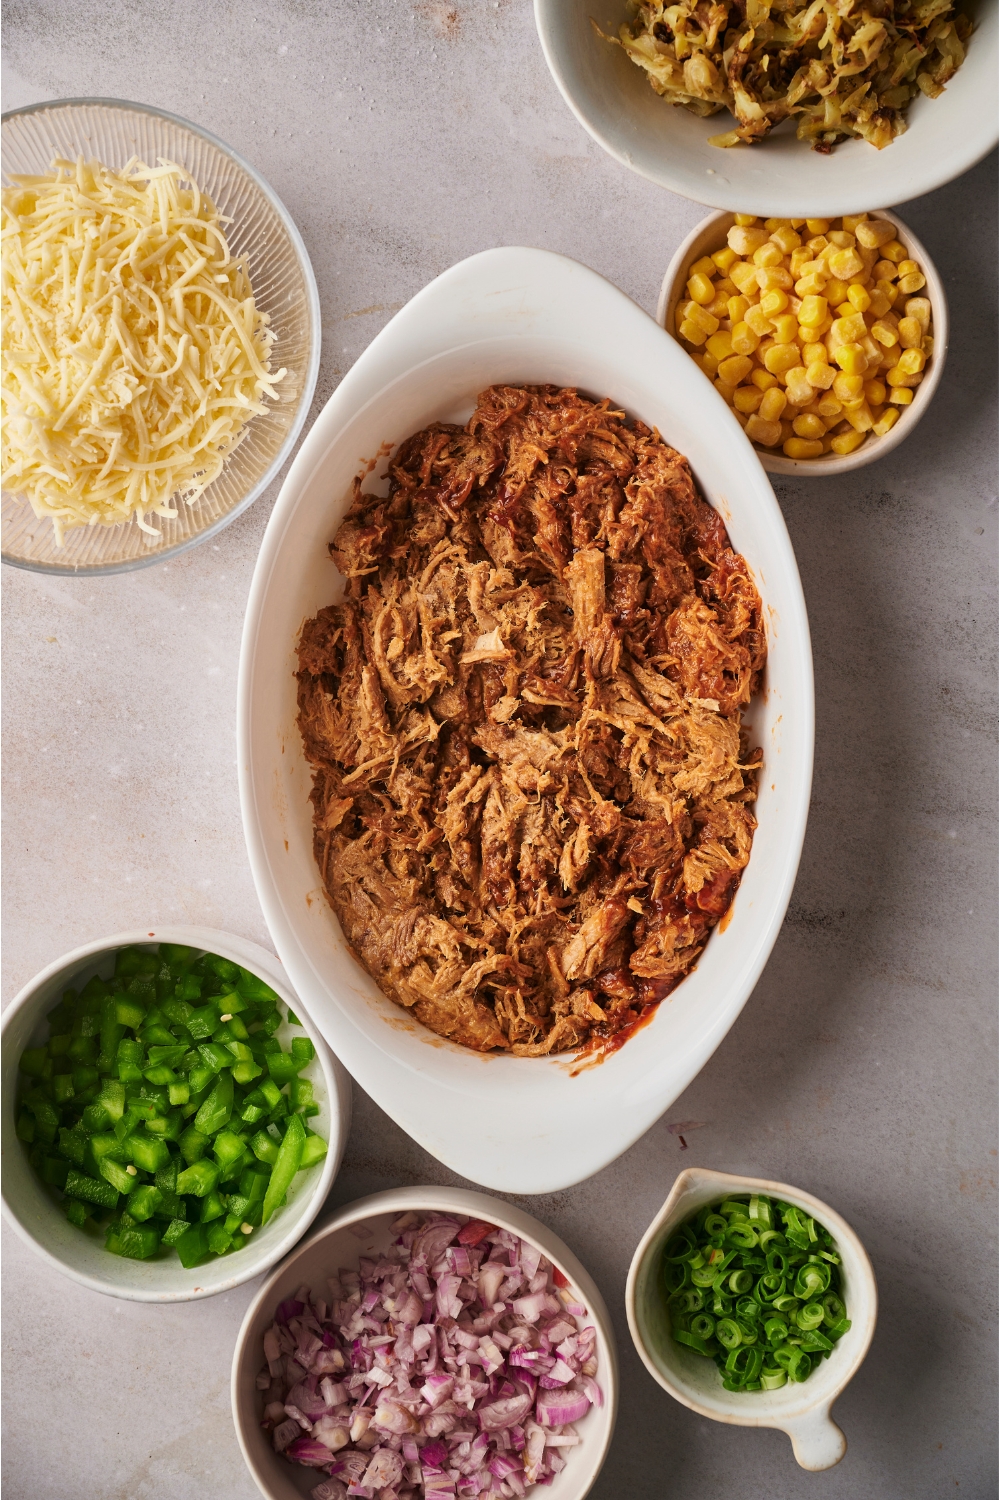 A white baking dish filled with BBQ pulled pork surrounded by an assortment of ingredients including bowls of corn, diced onion, diced peppers, shredded cheese, and diced green onion.